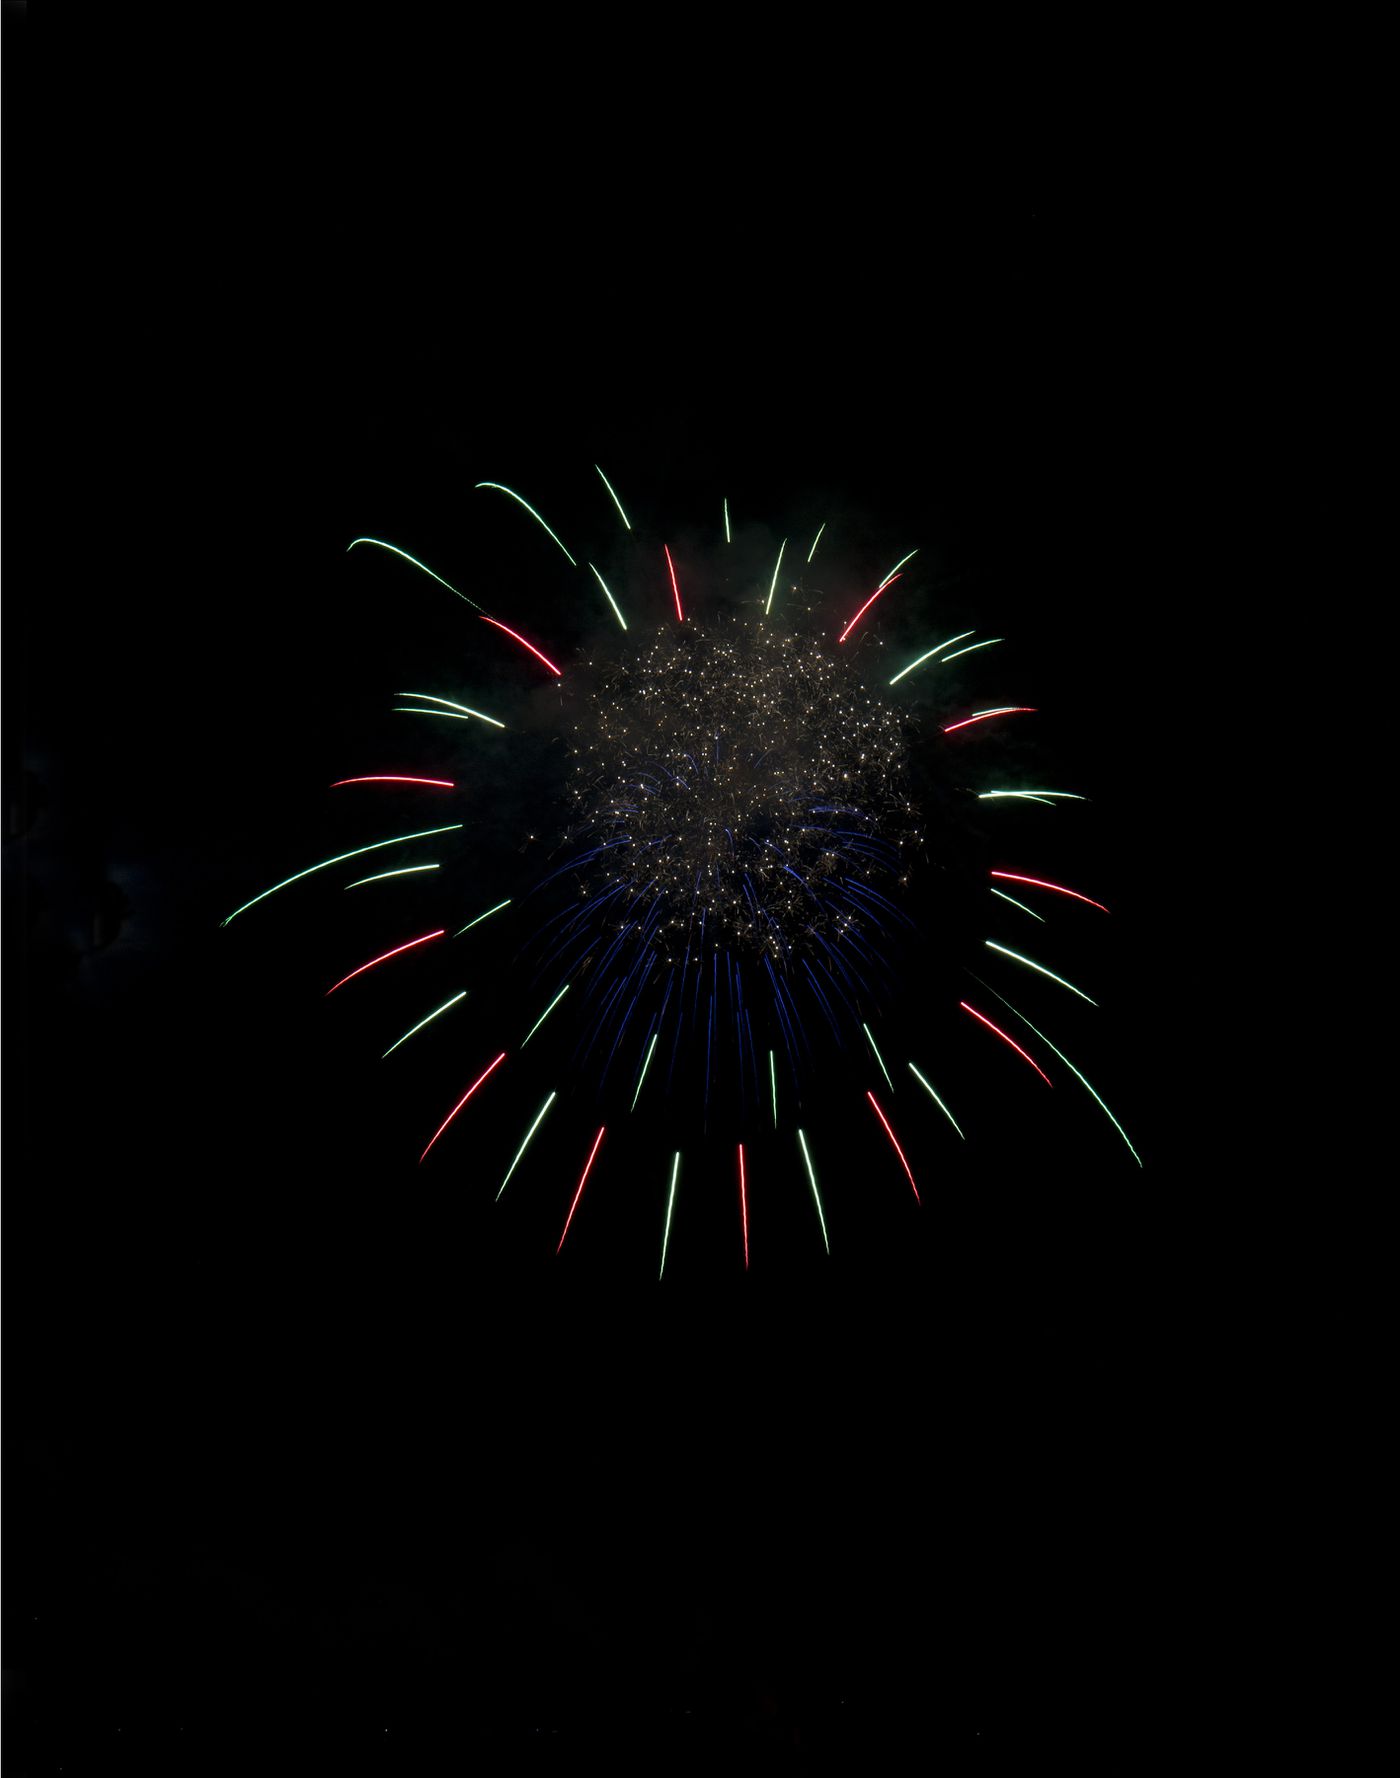 A Few Sequences of Fireworks, August 2015, Cavallino, Italy